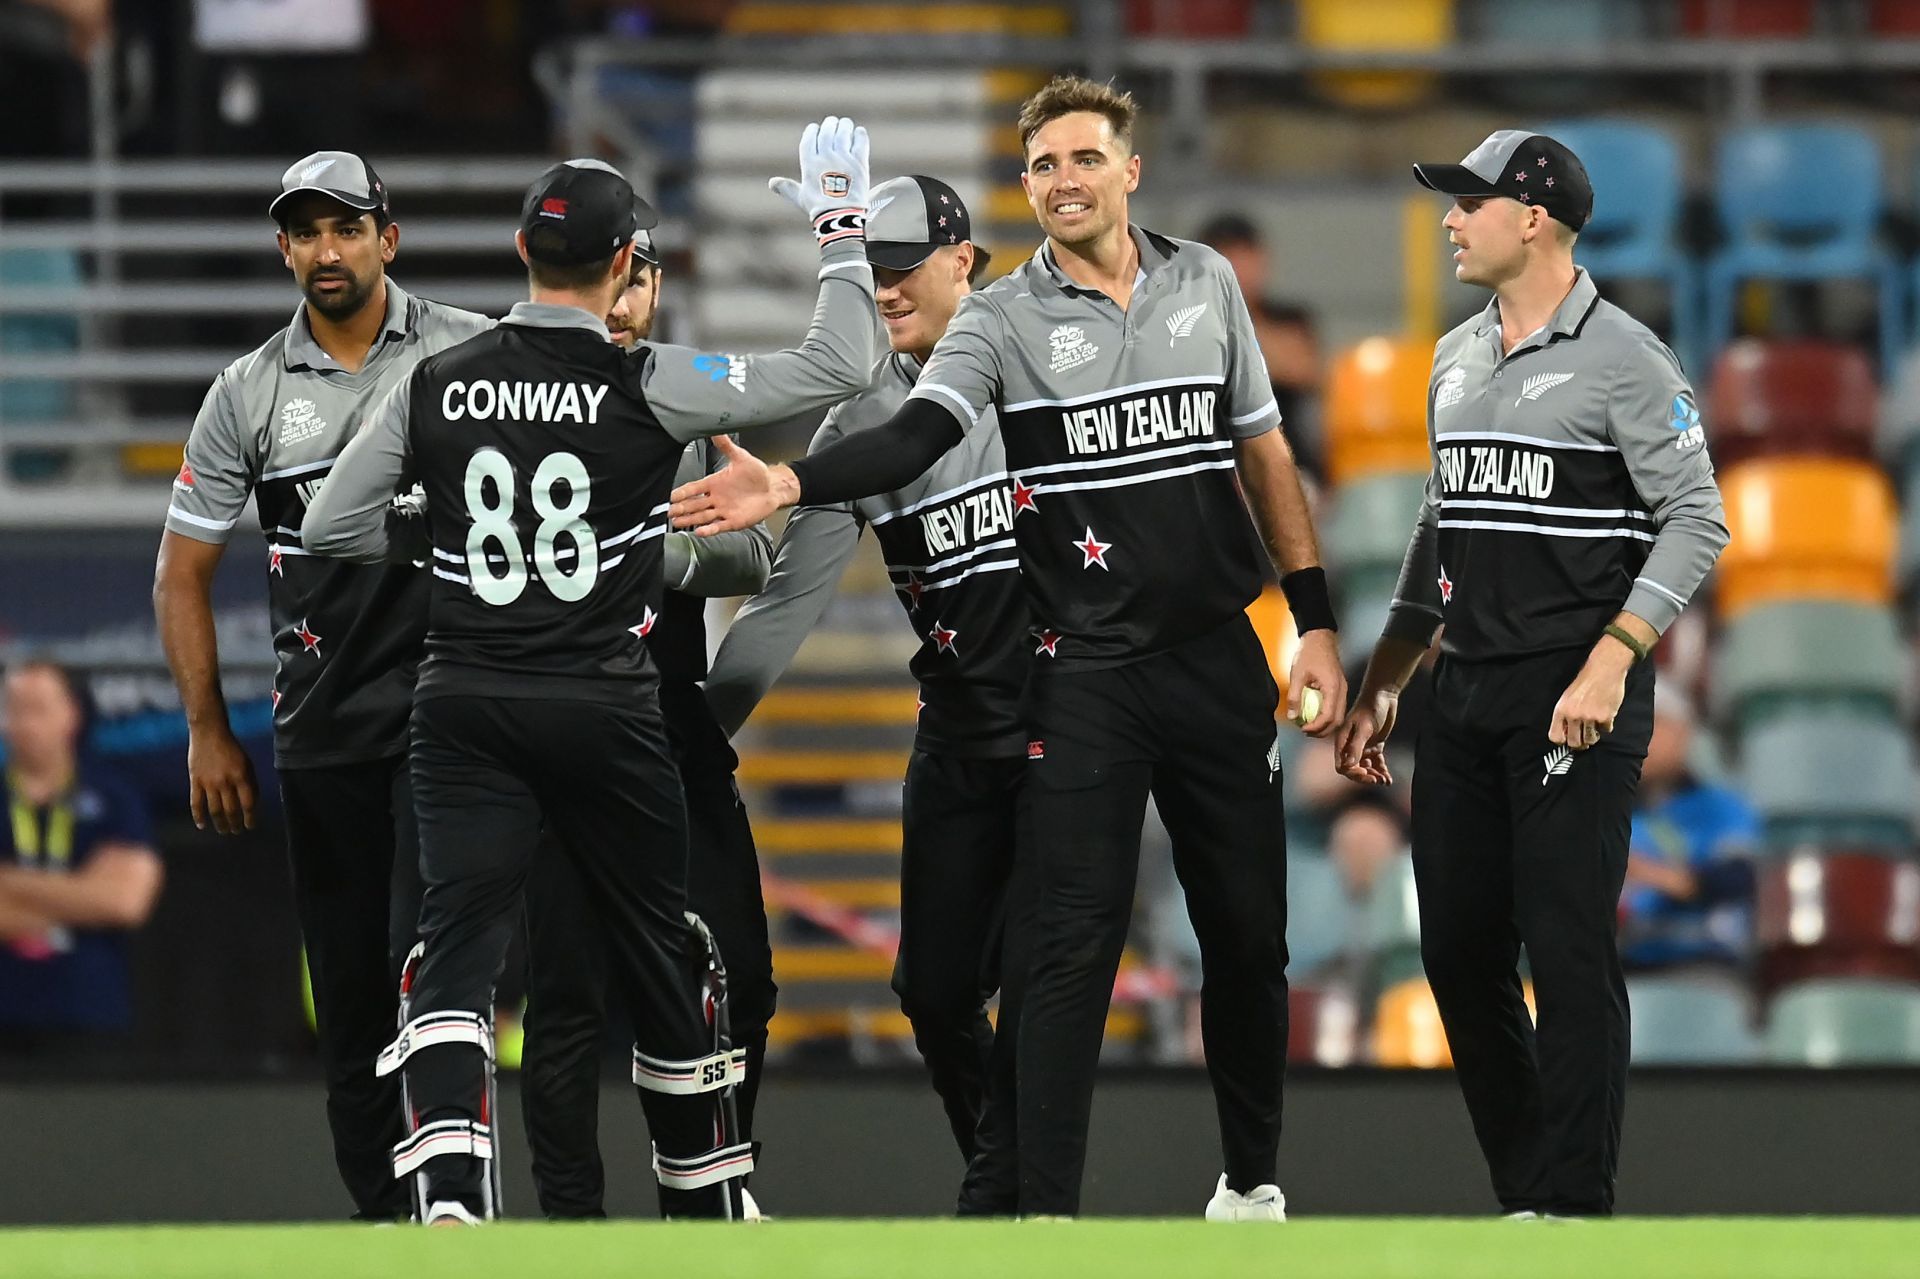 Tim Southee celebrates a dismissal. Pic: Getty Images